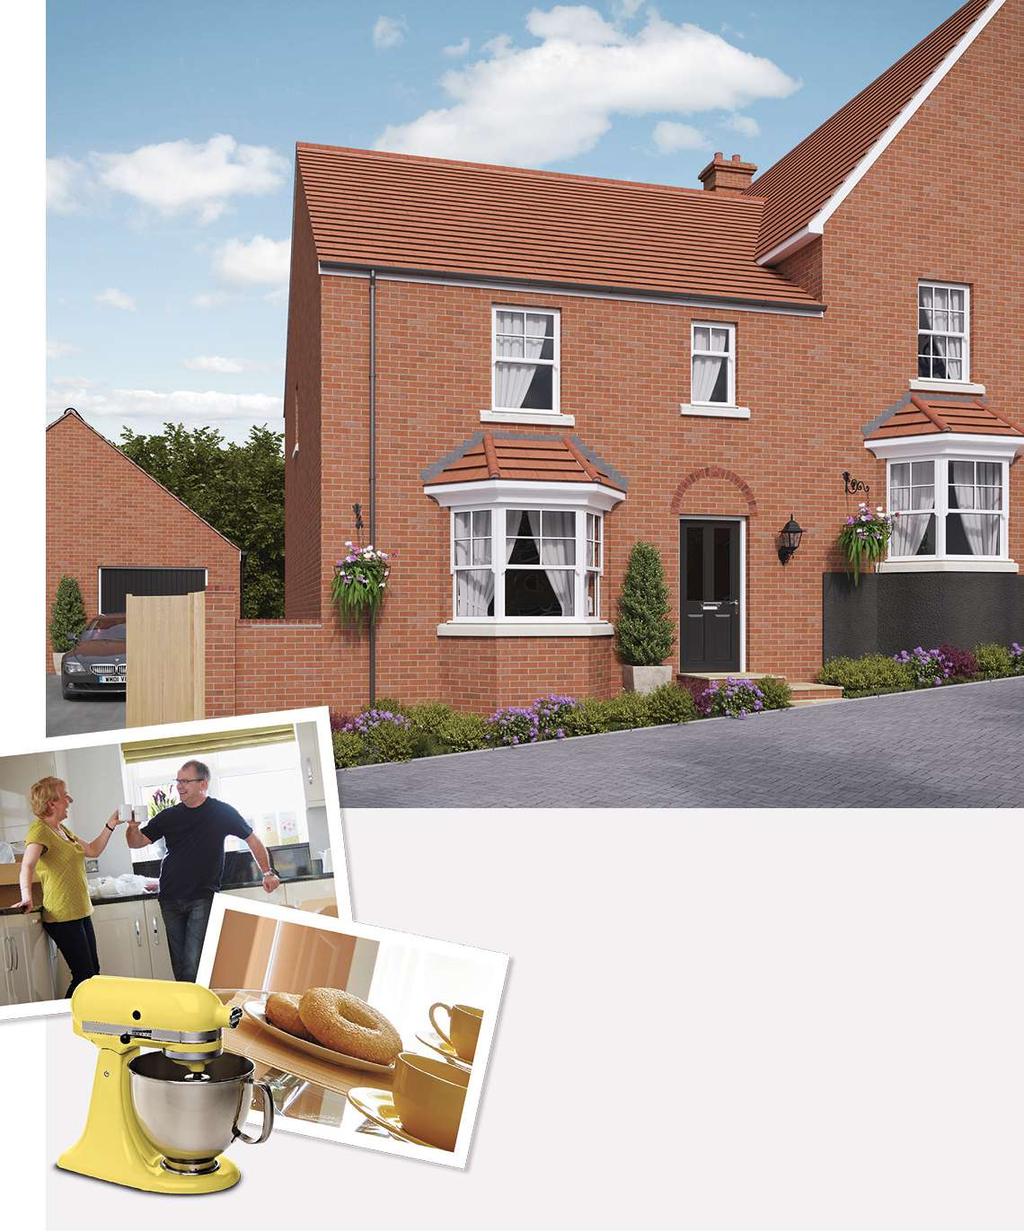 EDLOGAN WHARF The Midford 4 bedroom home Enjoy contemporary liing in The Midford, a loely 4 bedroom home where comfort meets style.